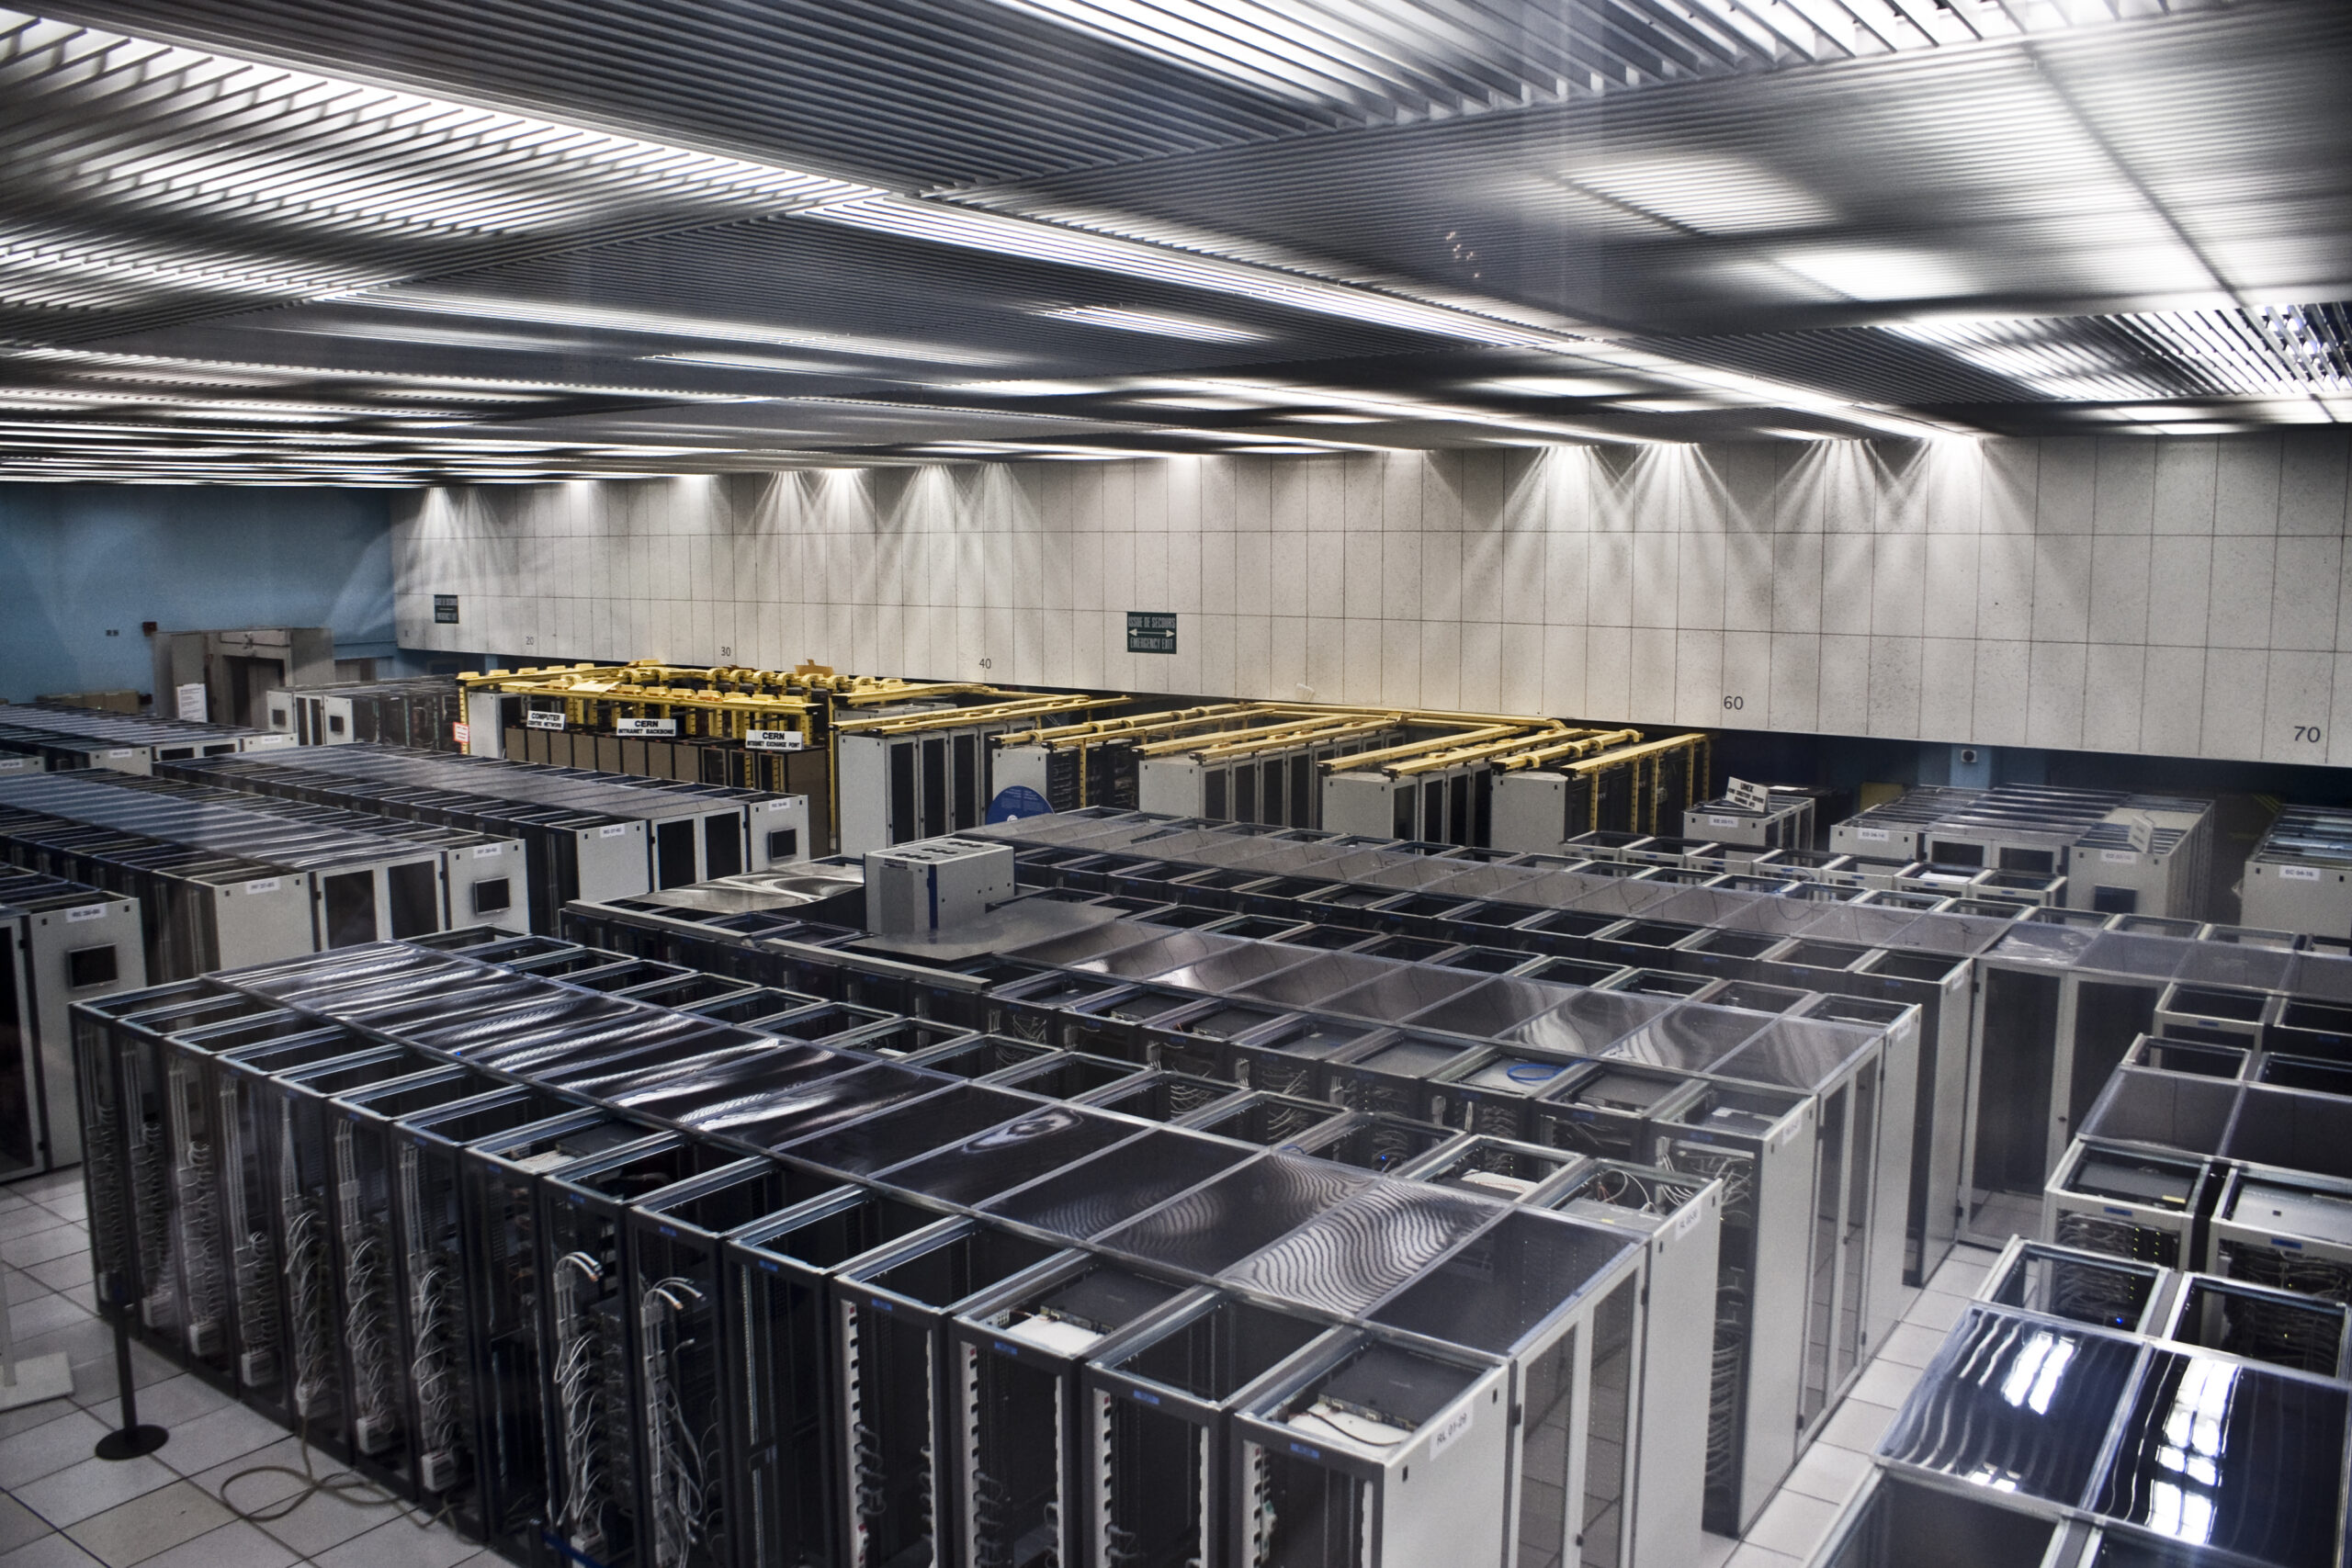 A room with data processing servers. The servers are large rectangles and are shown standing shoulder-to-shoulder with one another.